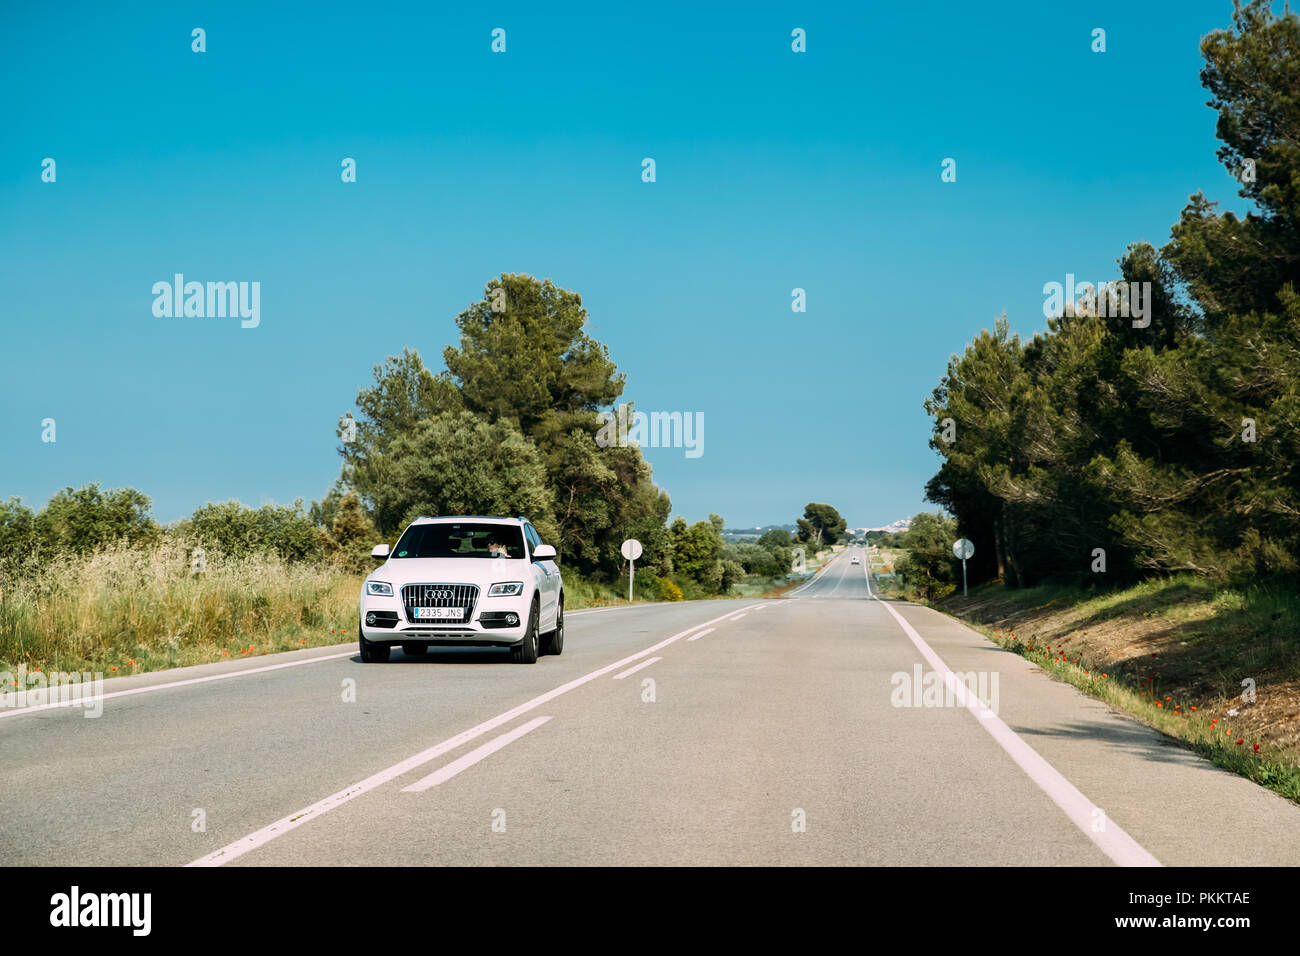 Palauborrell, Spain - May 17, 2018: Audi Q5 8R Car Of White Color Drive In Spanish Country Road. Stock Photo